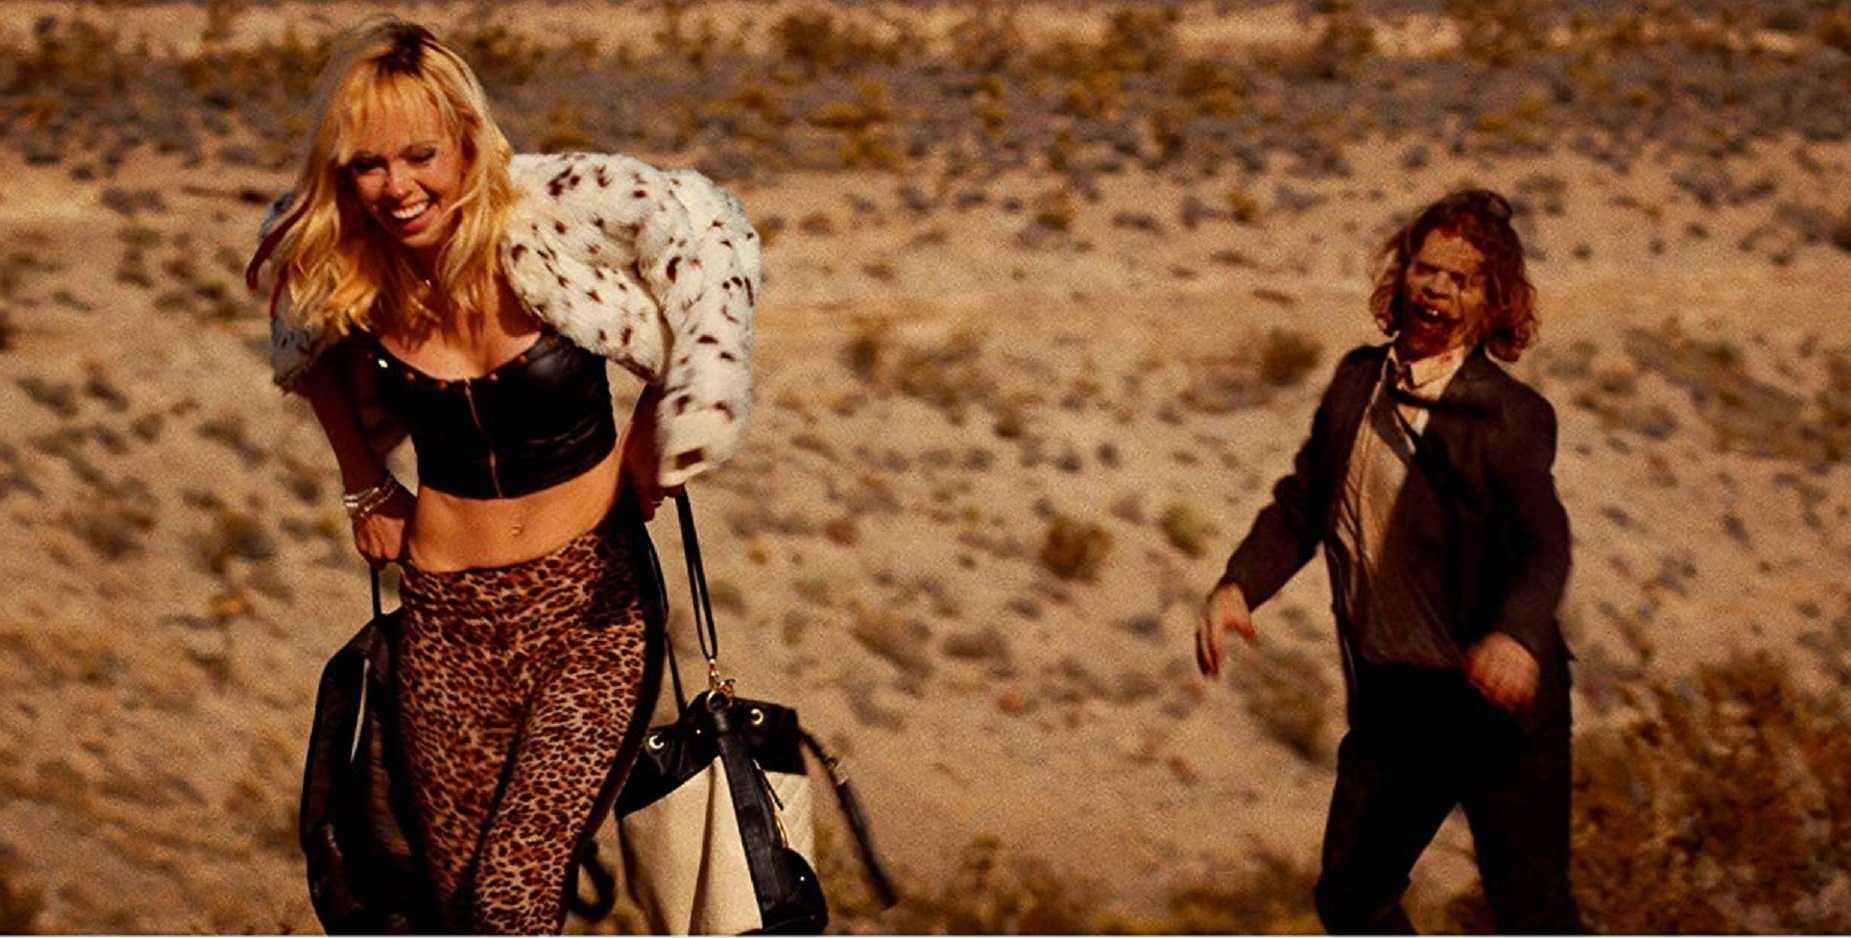 Brittany Allen makes her way through the desert pursued by the zombie Smalls (Juan Riedinger) in It Stains the Sand Red (2016)